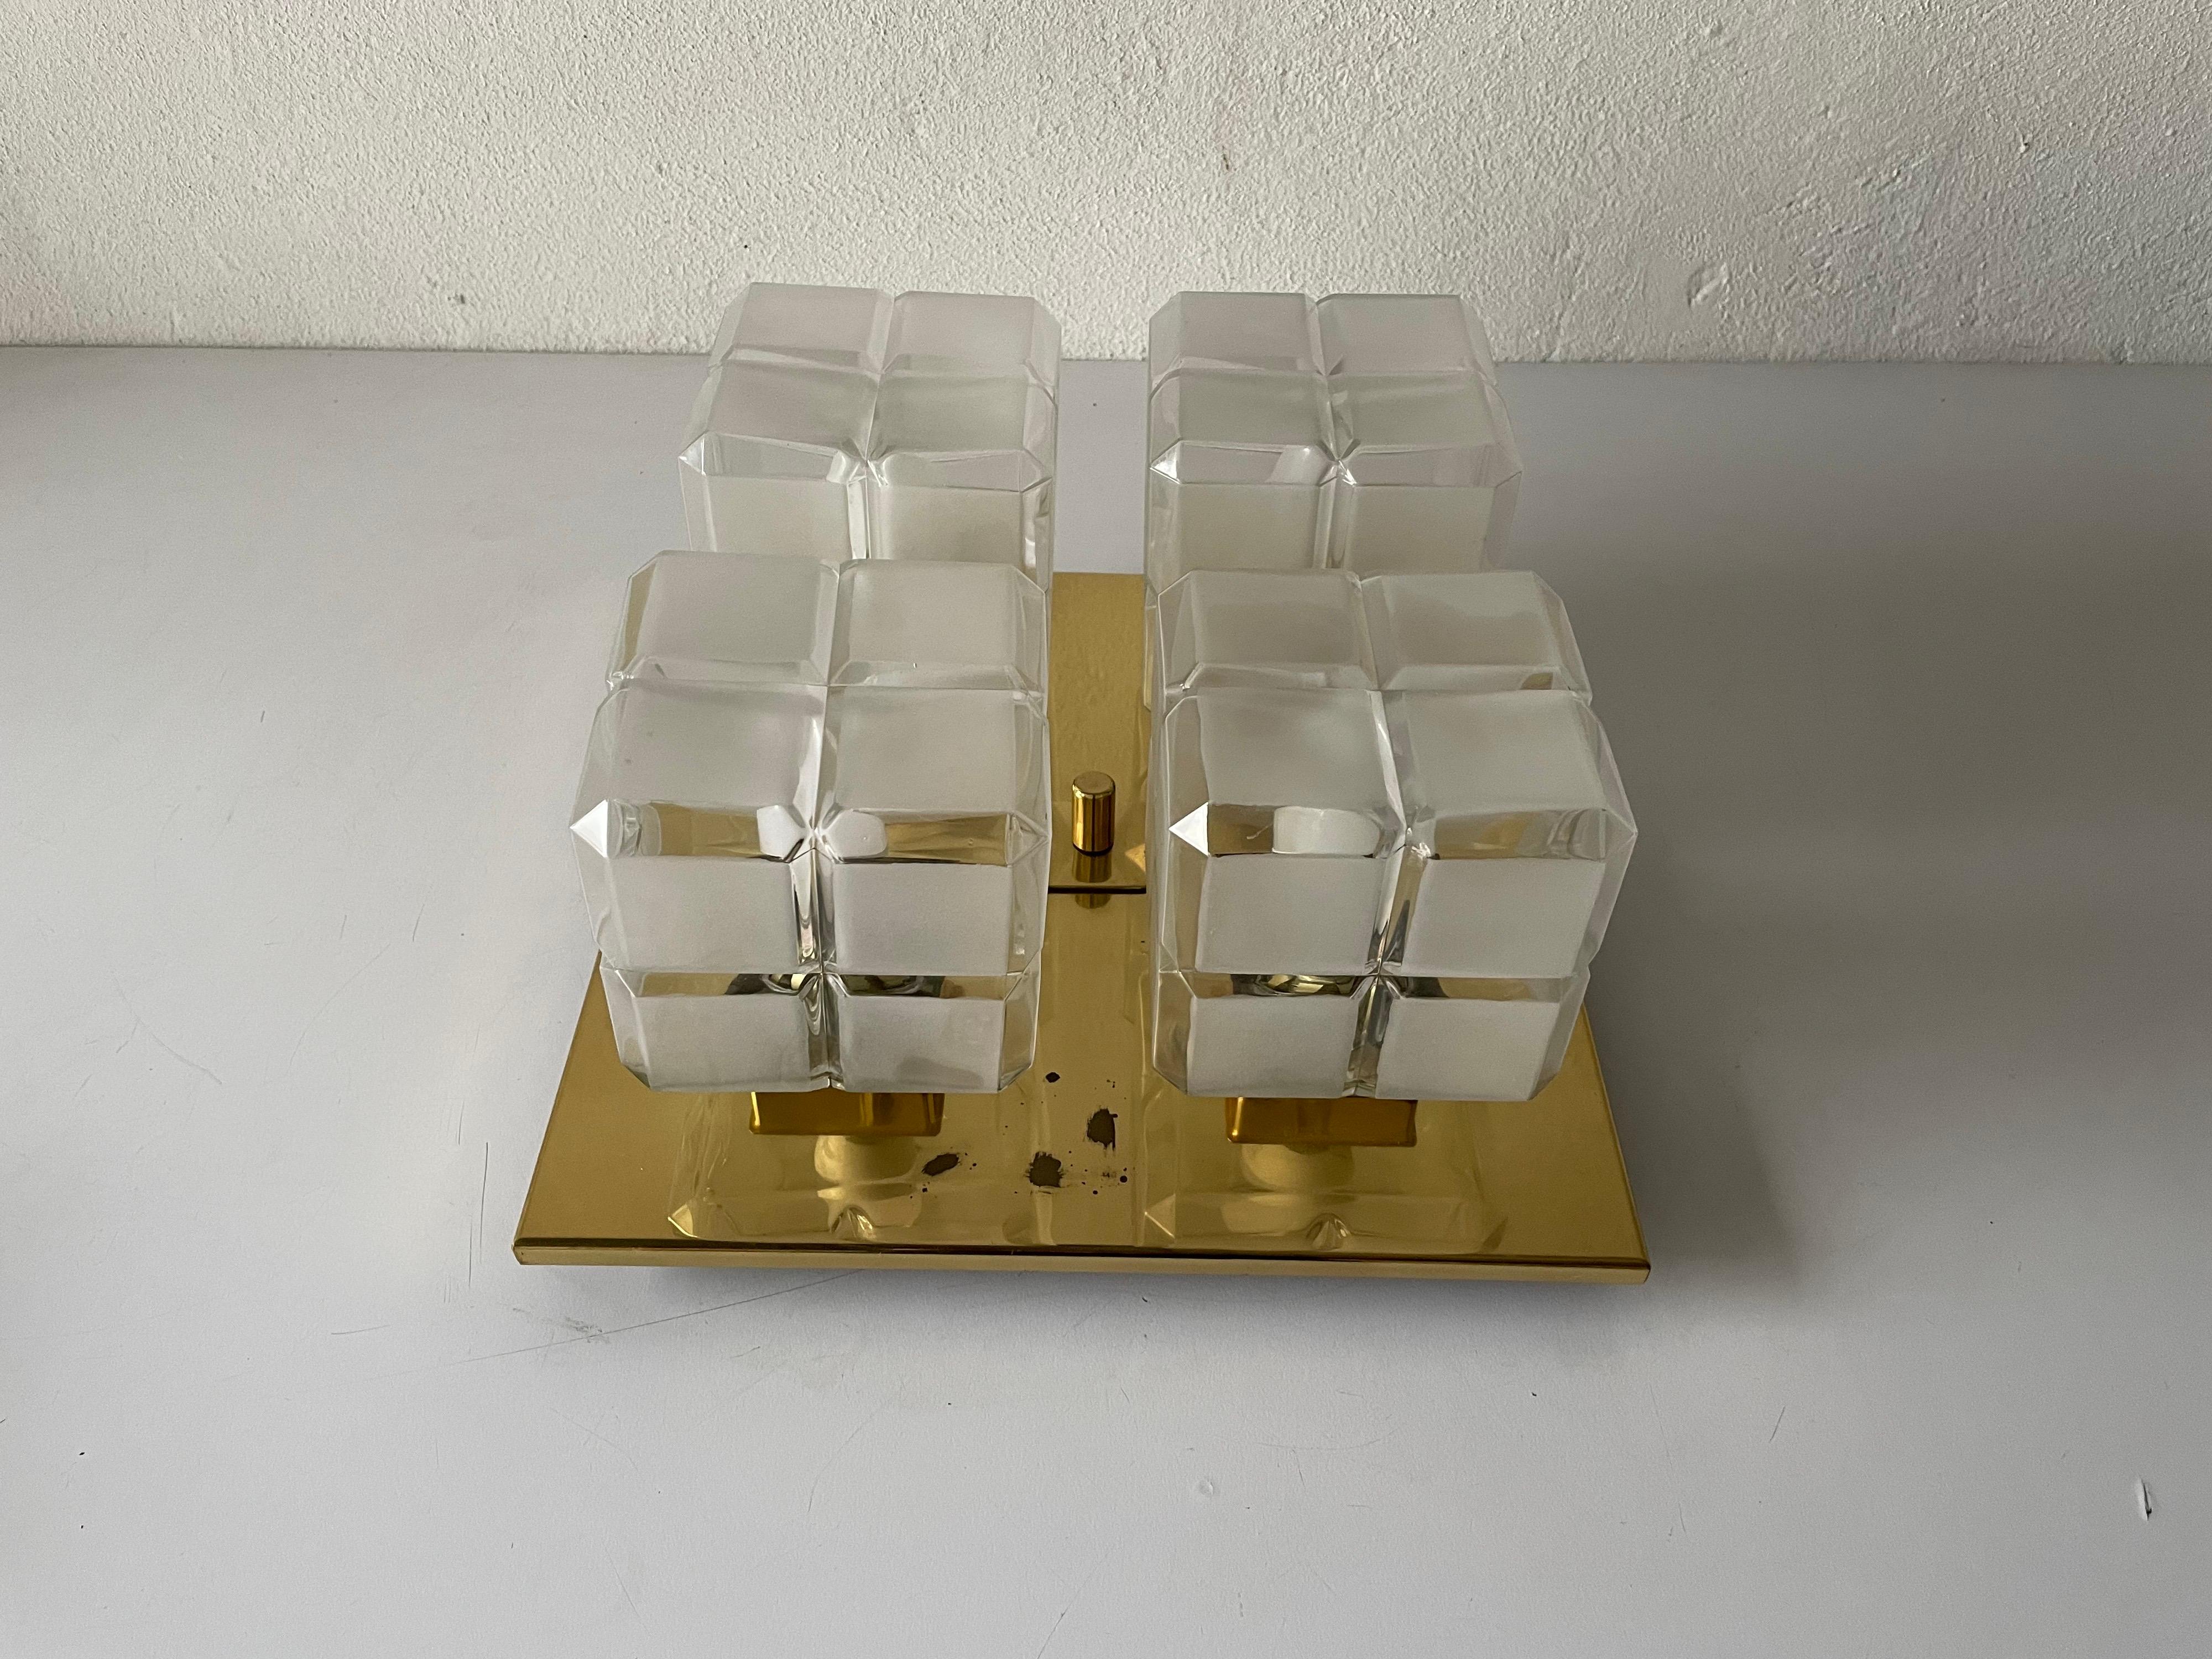 Wonderful cube glass and brass flush mount light by Kalmar Leuchten, 1960s, Germany

Lampshade is in very good vintage condition.

This lamp works with 4xE14 light bulbs. 
Wired and suitable to use with 220V and 110V for all